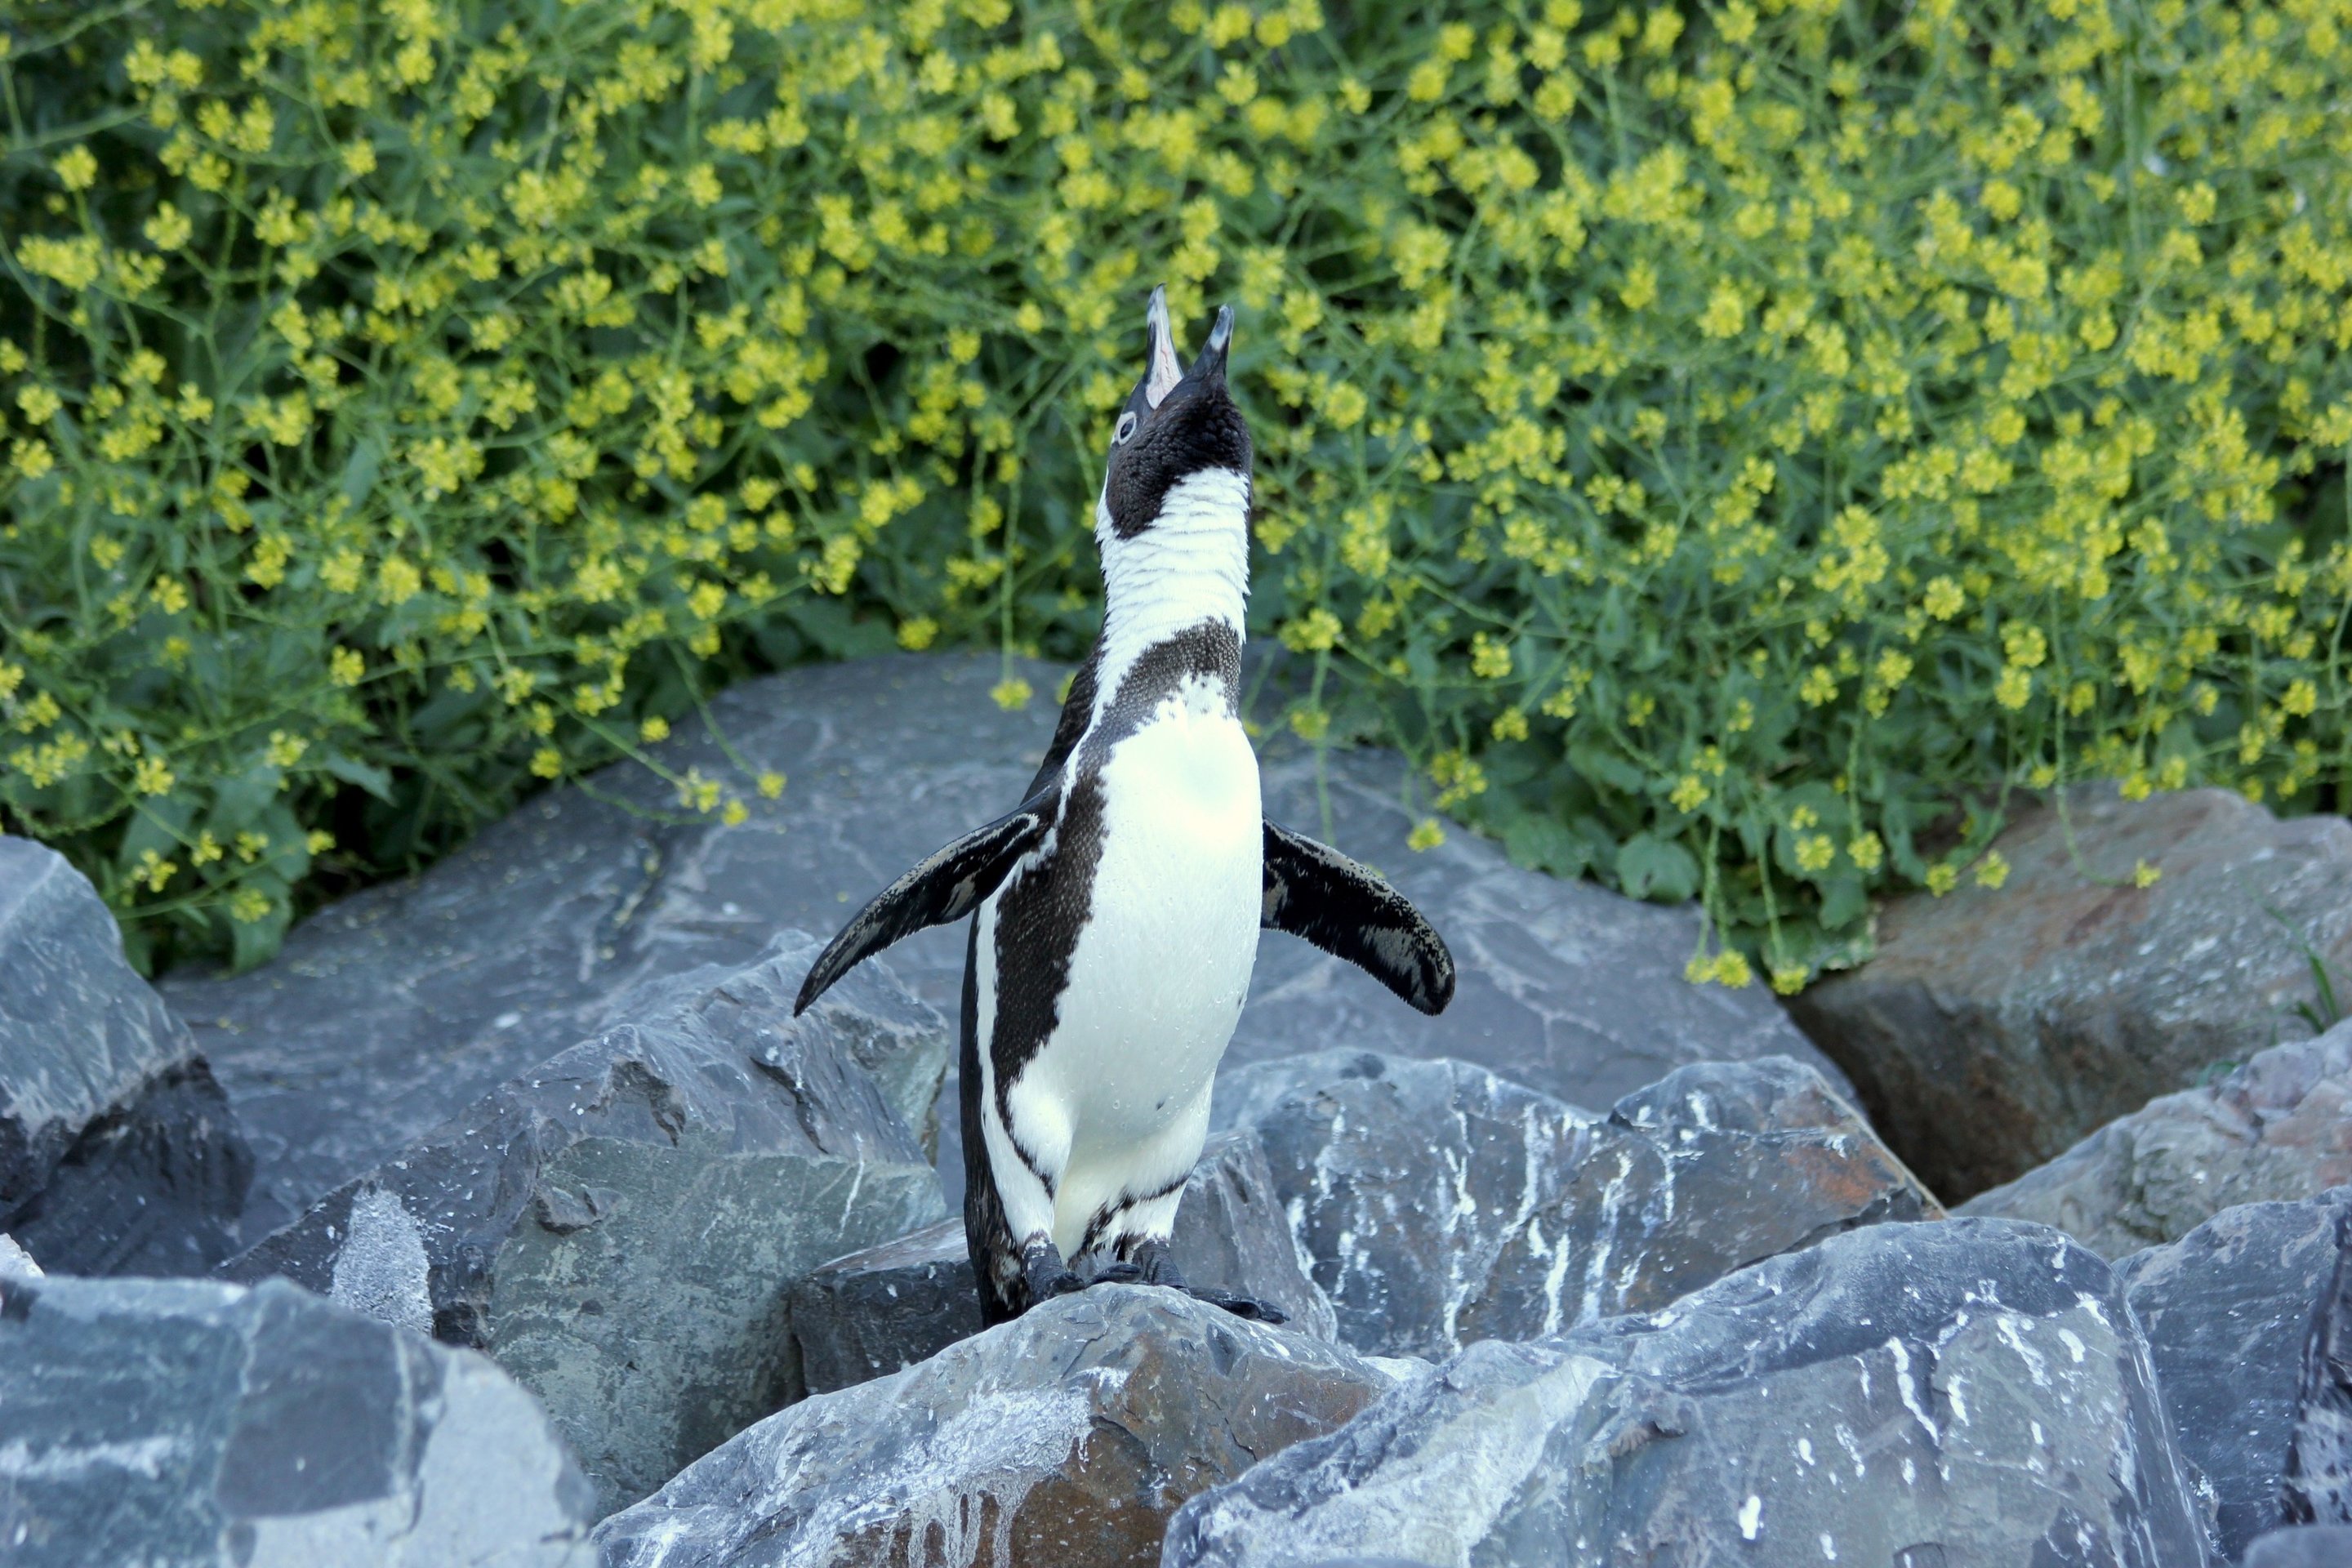 Scientists team up on study to save endangered African Penguins